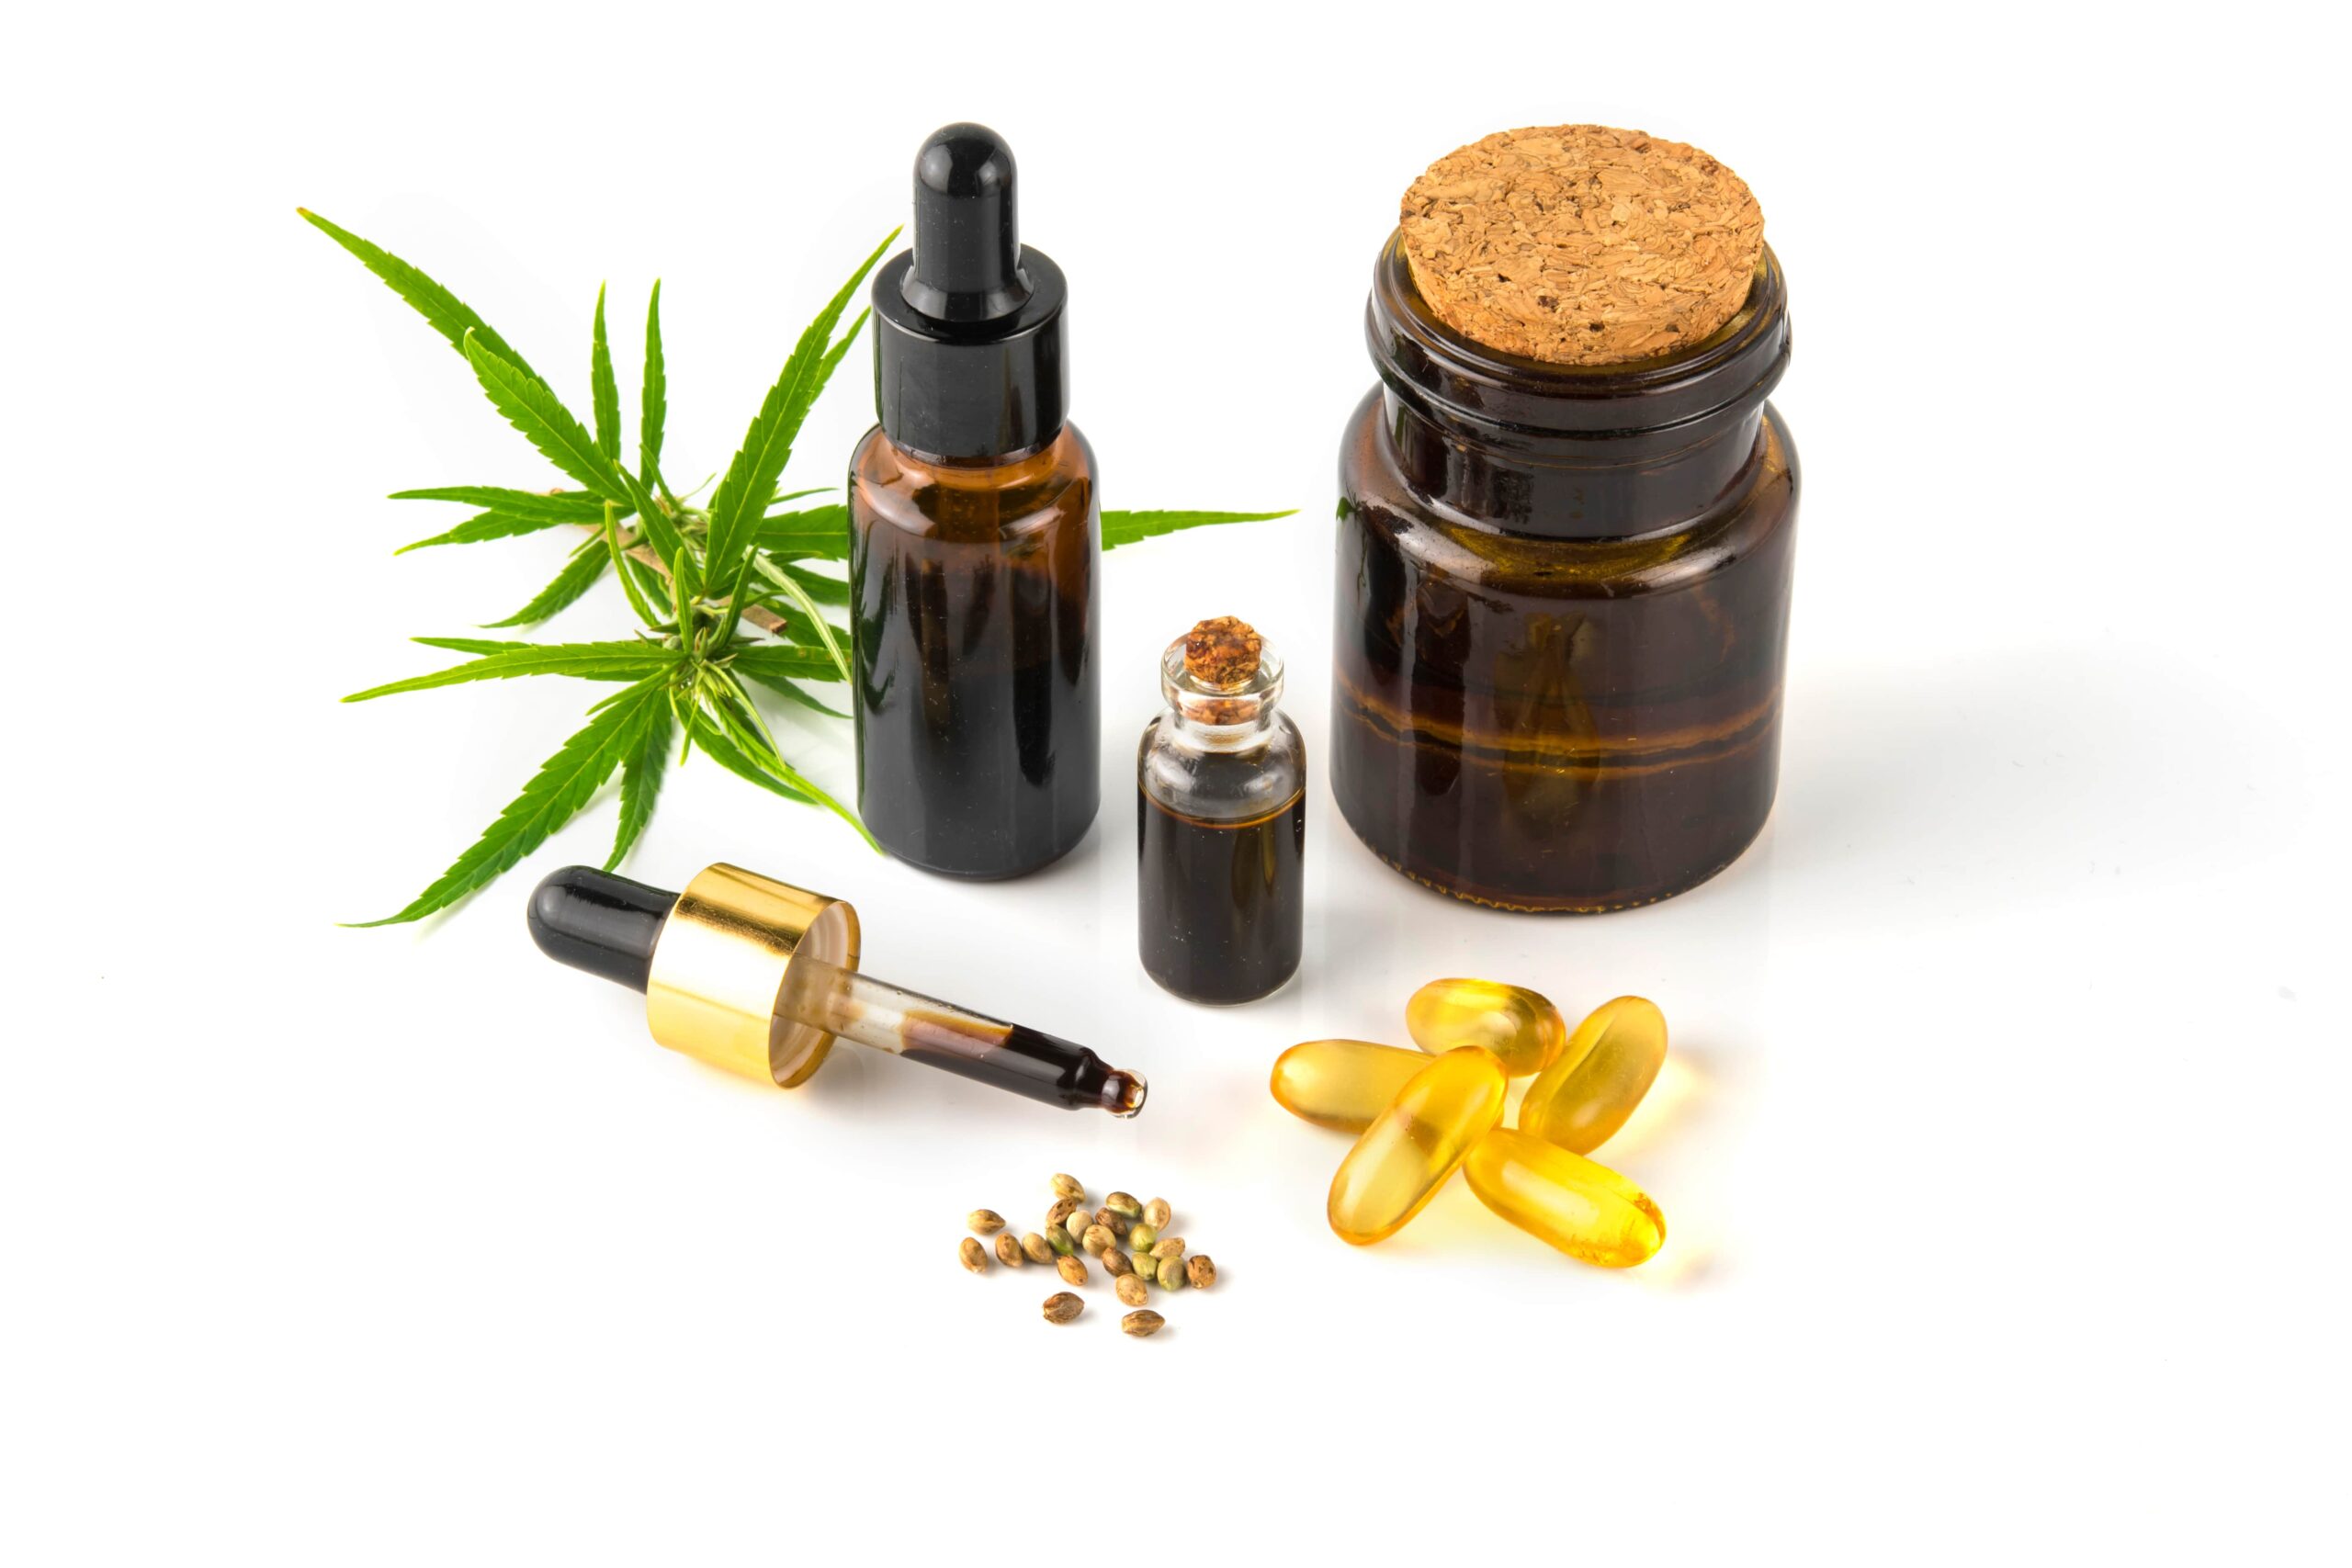 Vapes, Tinctures, Topicals, and Edibles. What's The Best Way to Take CBD?